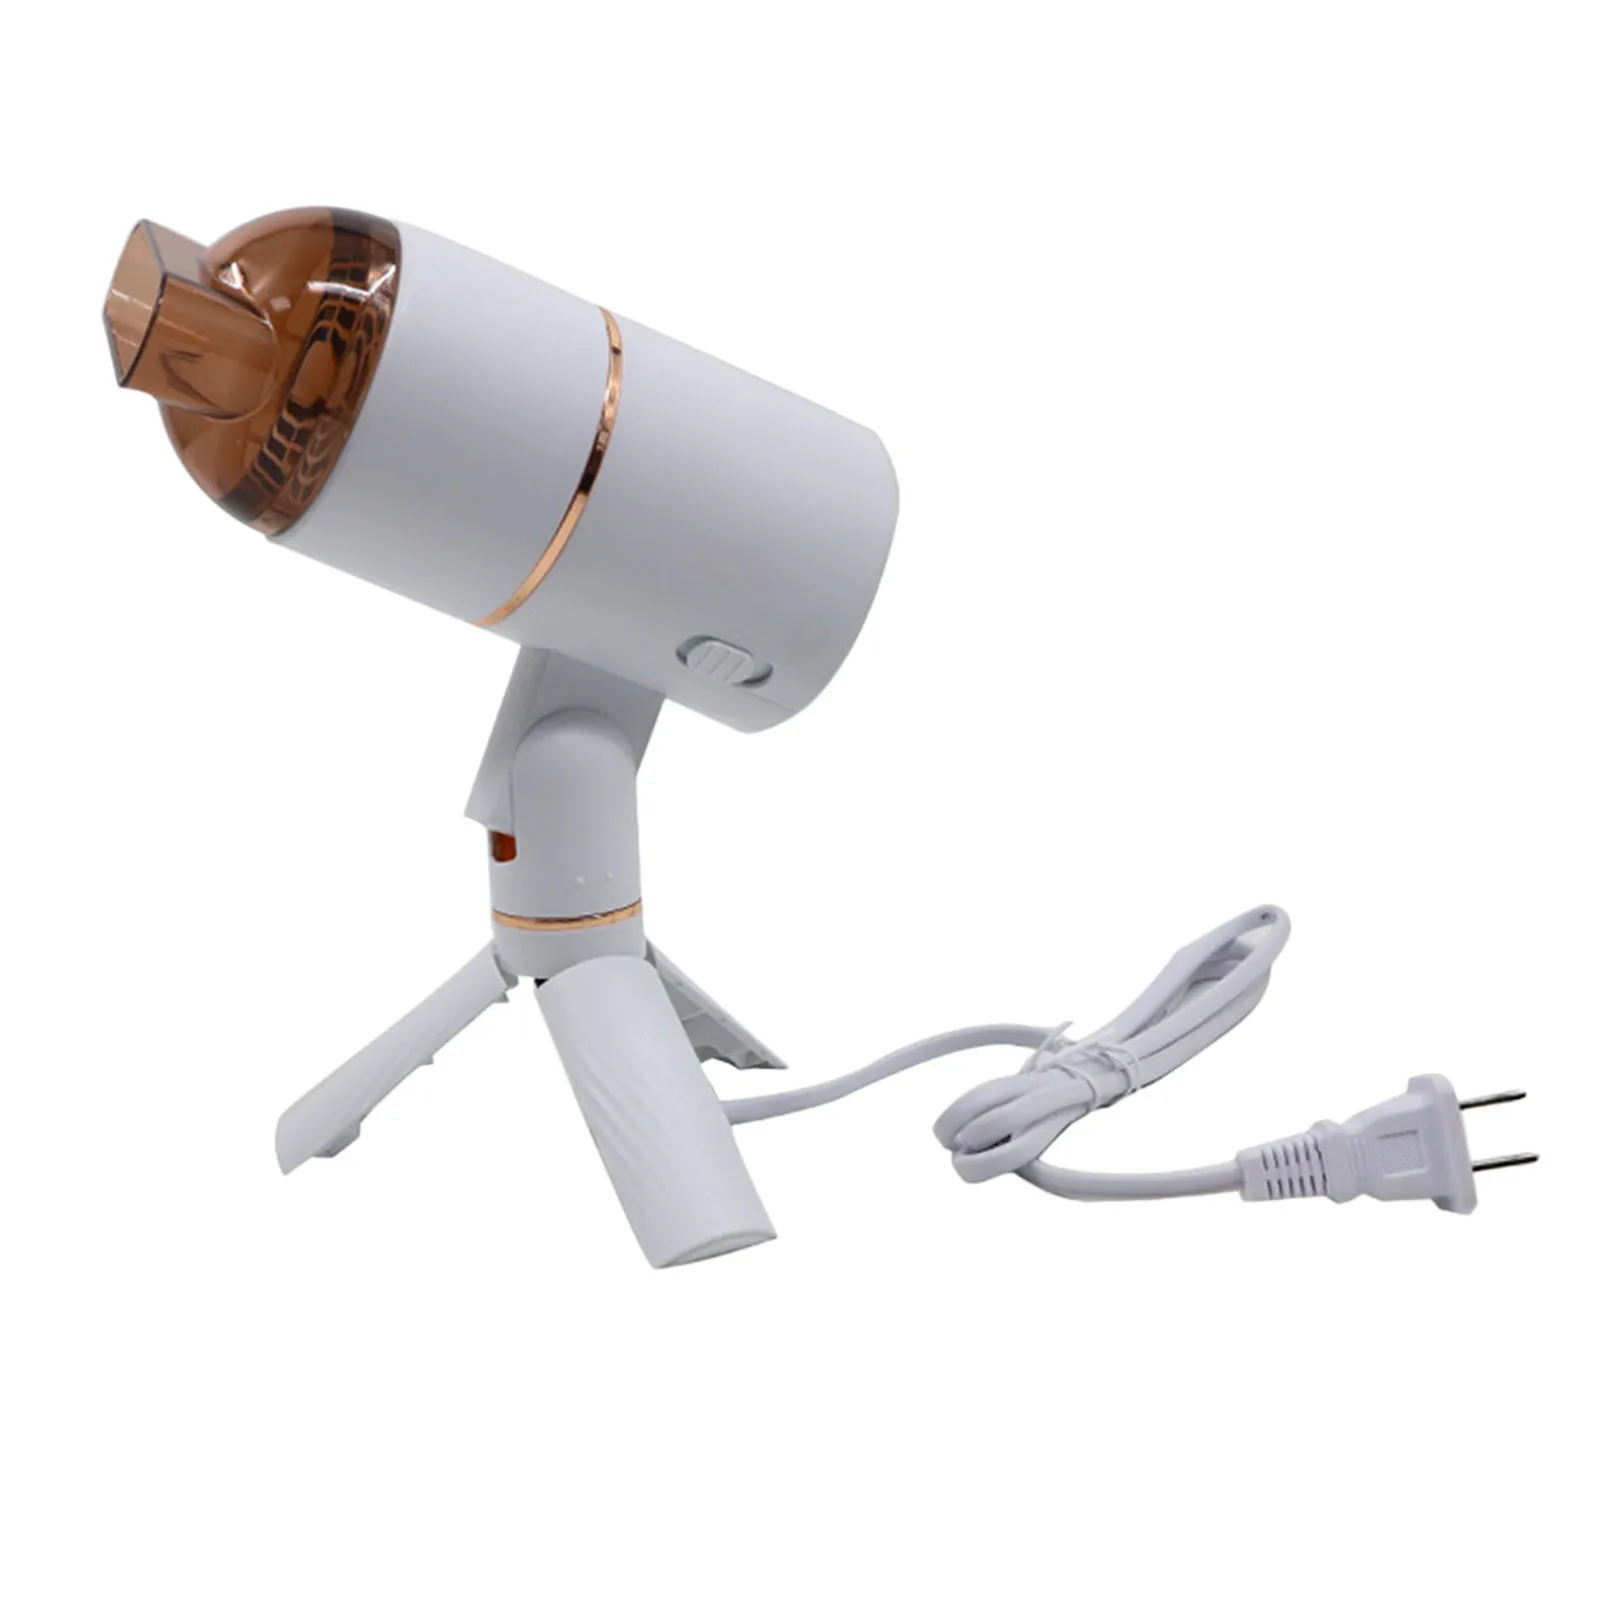 Hair Dryer Constant Temperature with 3 Gears Fast Drying Blow Dryer Professional Ionic Salon Hair Dryer for Home Dormitory